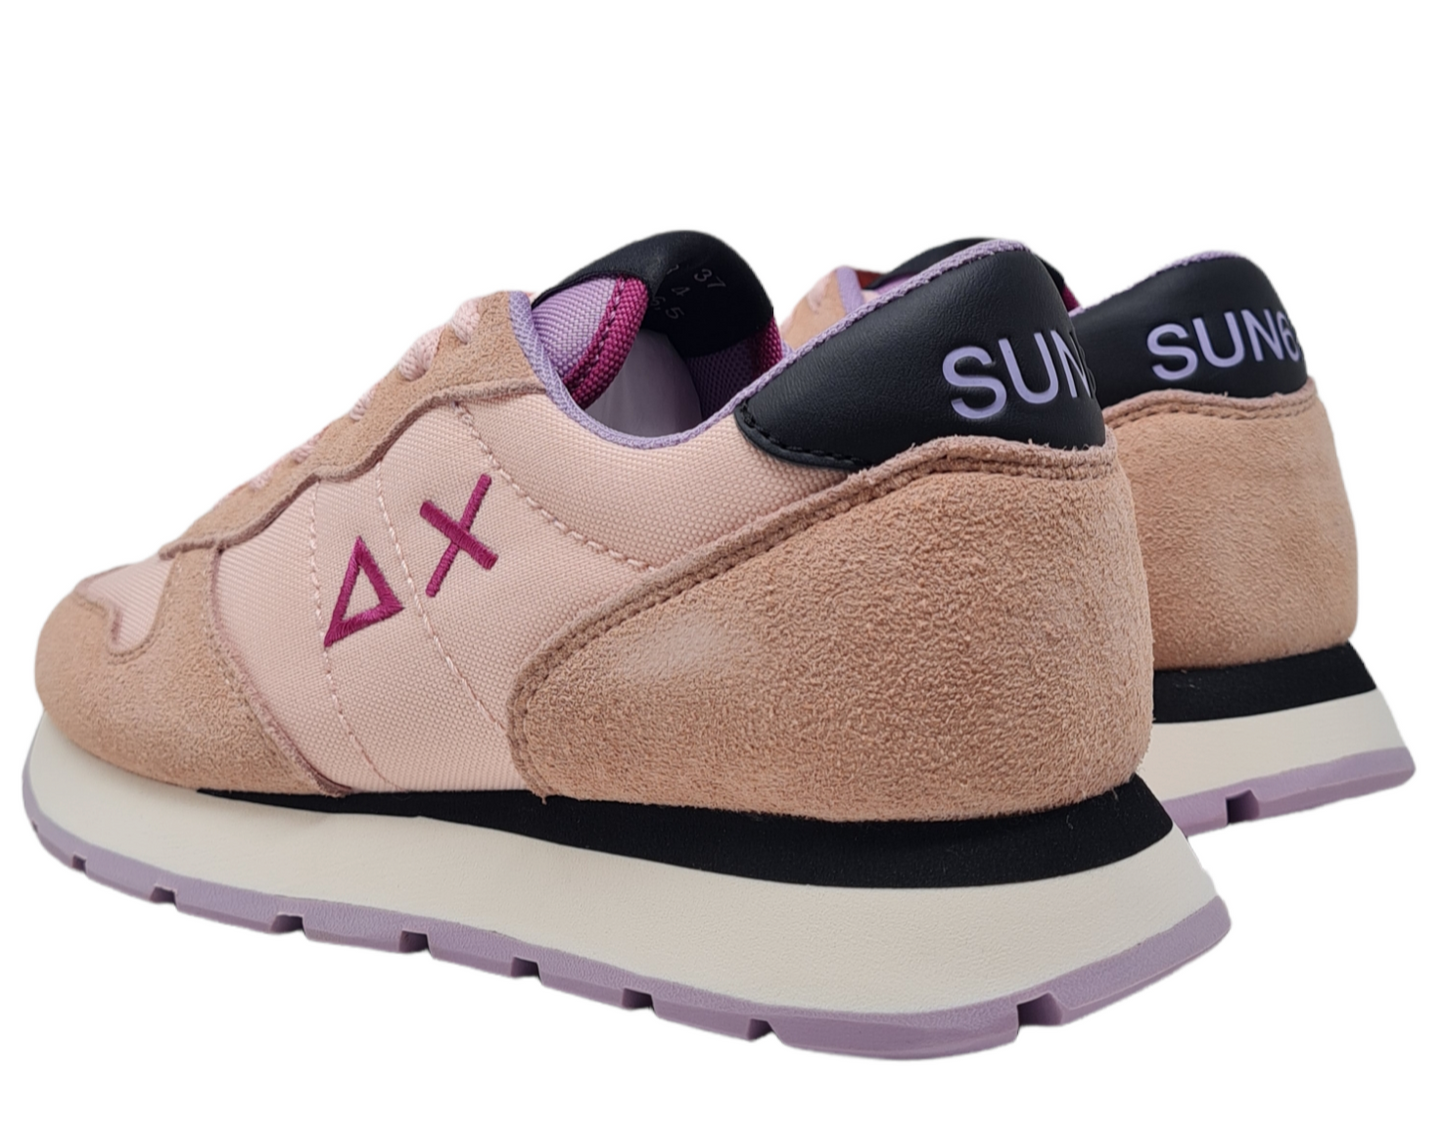 Sneakers Ally Nylon Solid Z42201/04